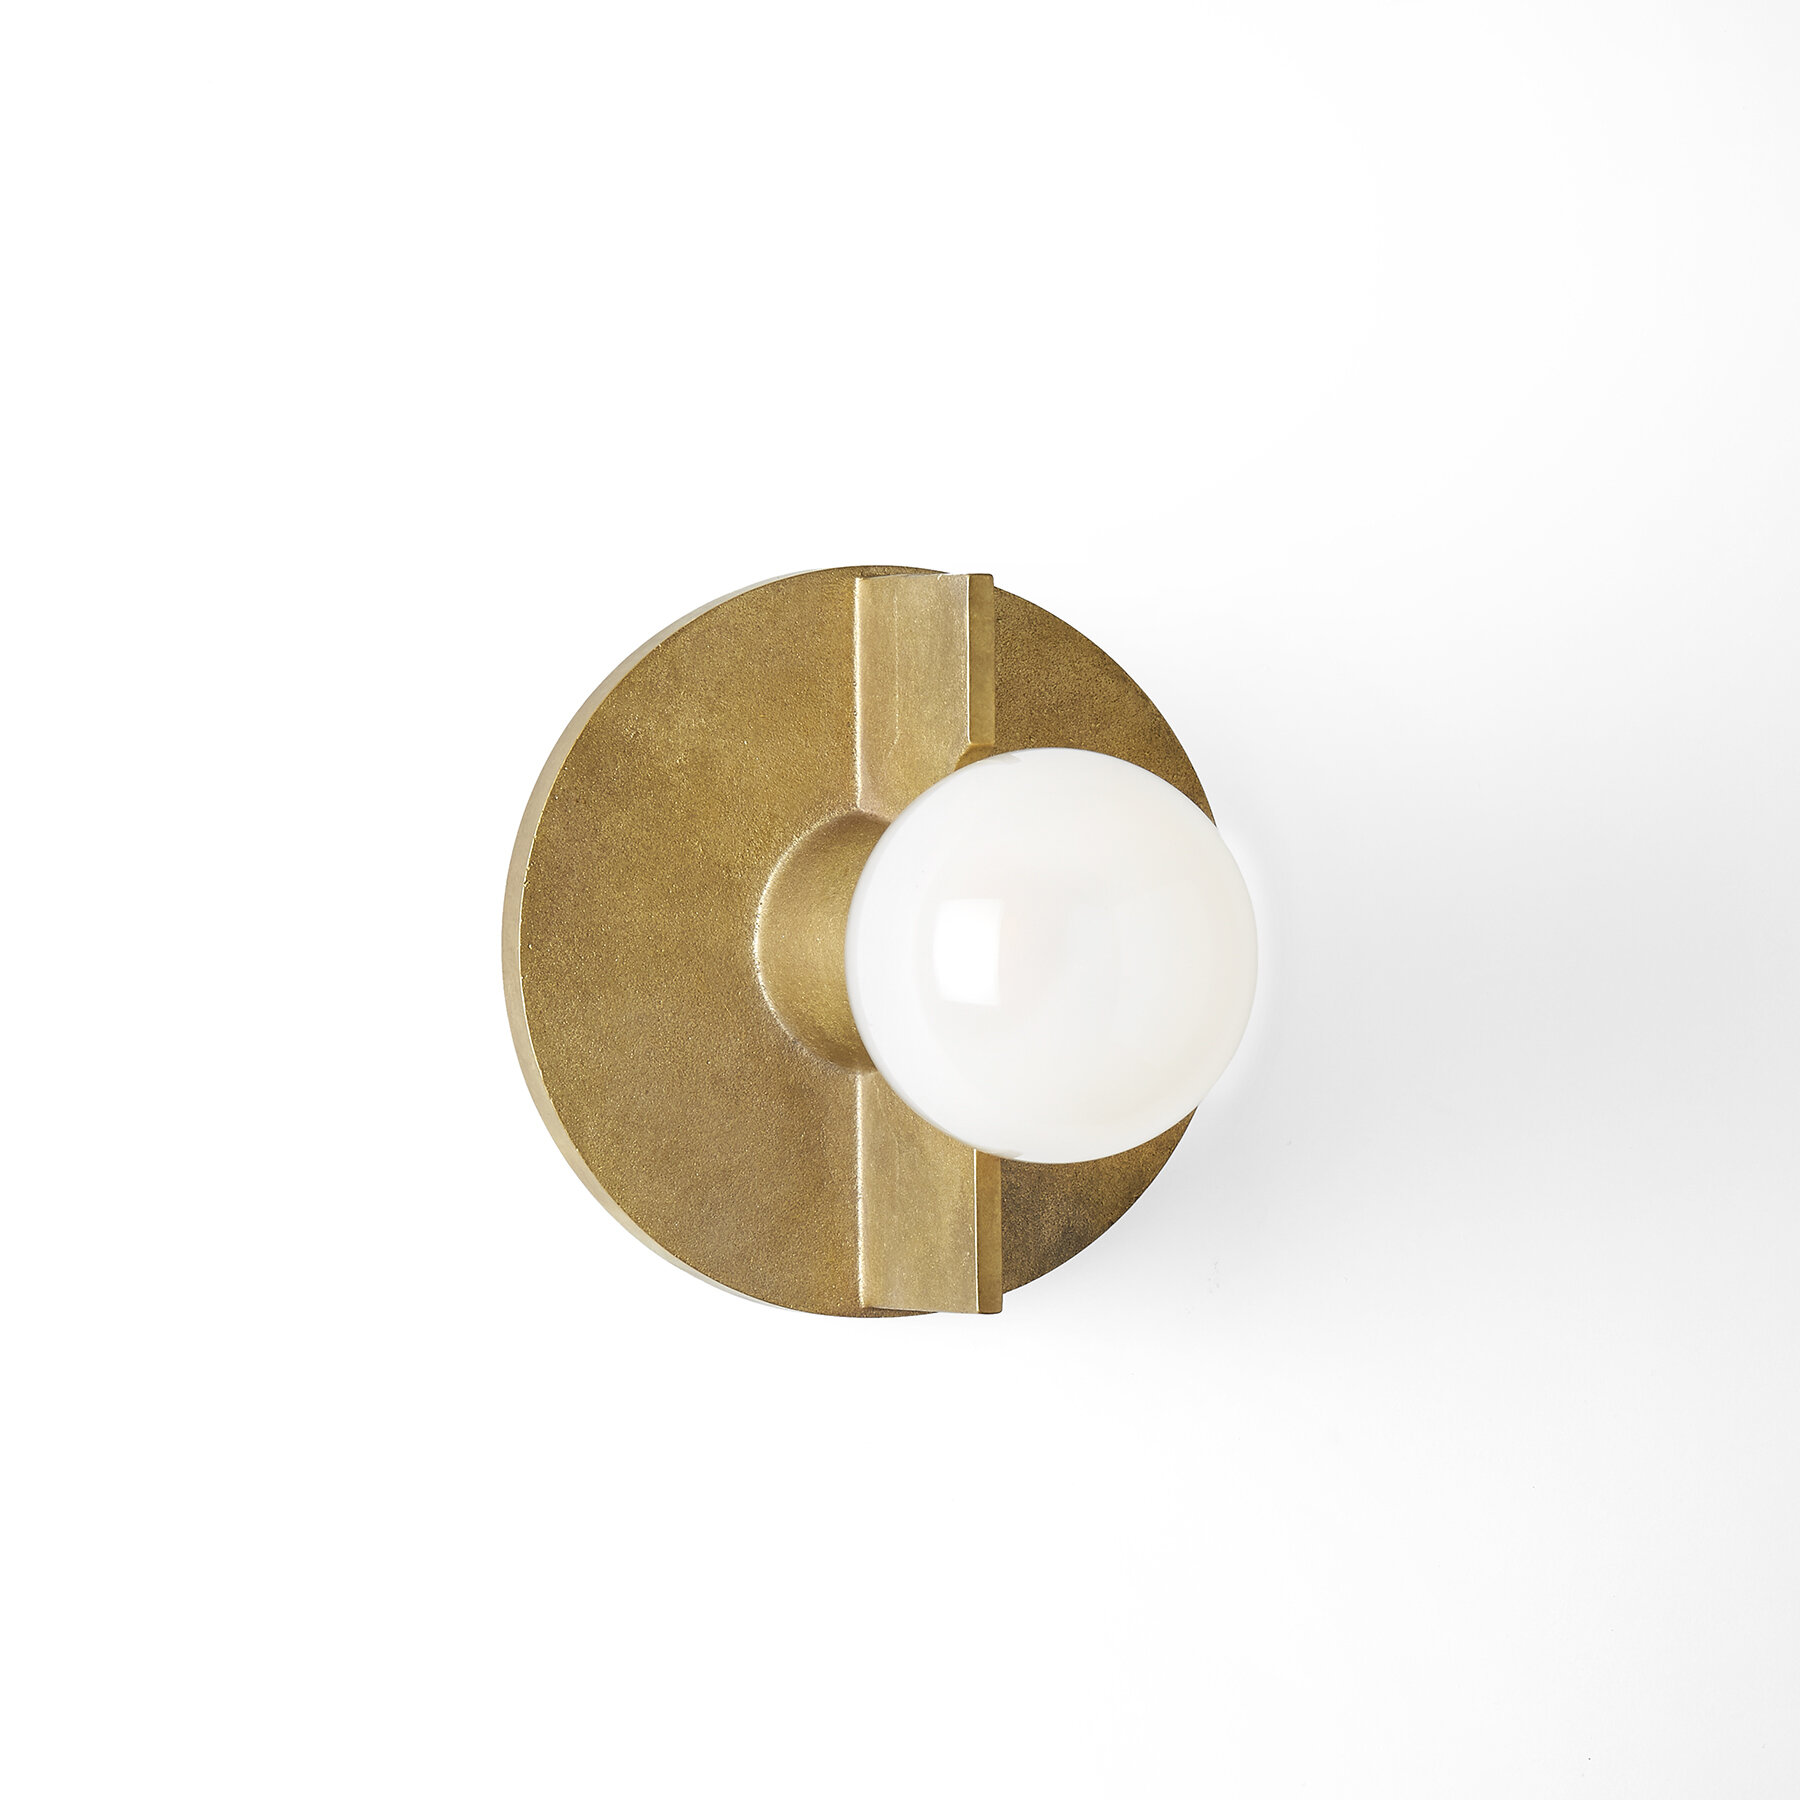 MERIDIAN SCONCE - ROUND 6.25" - $945